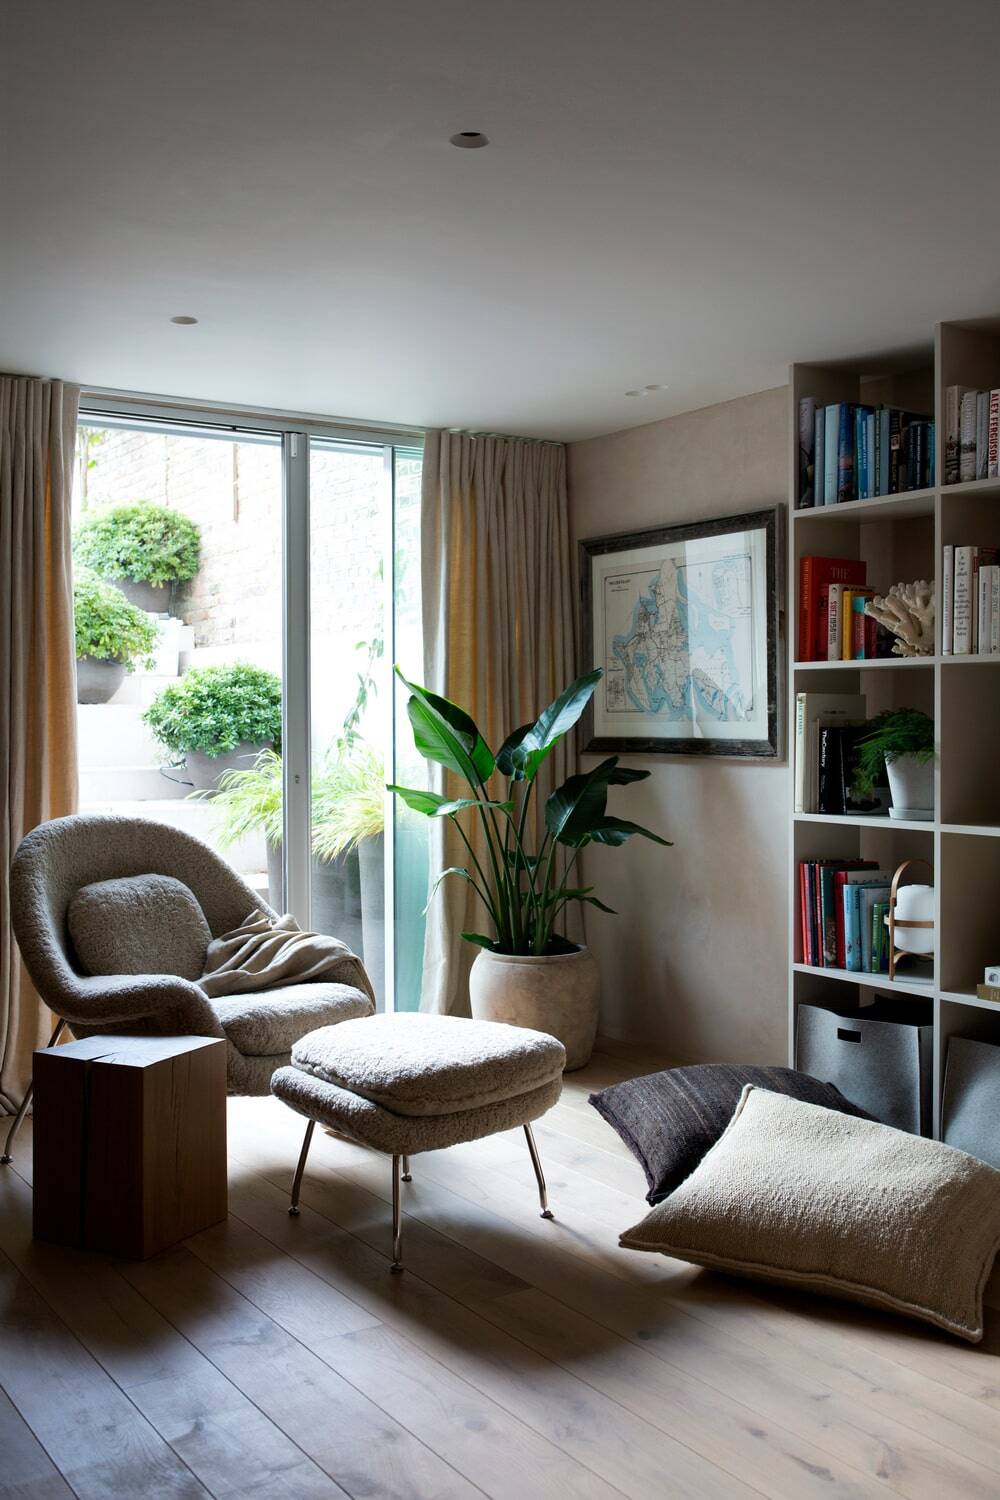 TR Studio Renovate and Extend Four-Storey West London Terrace House